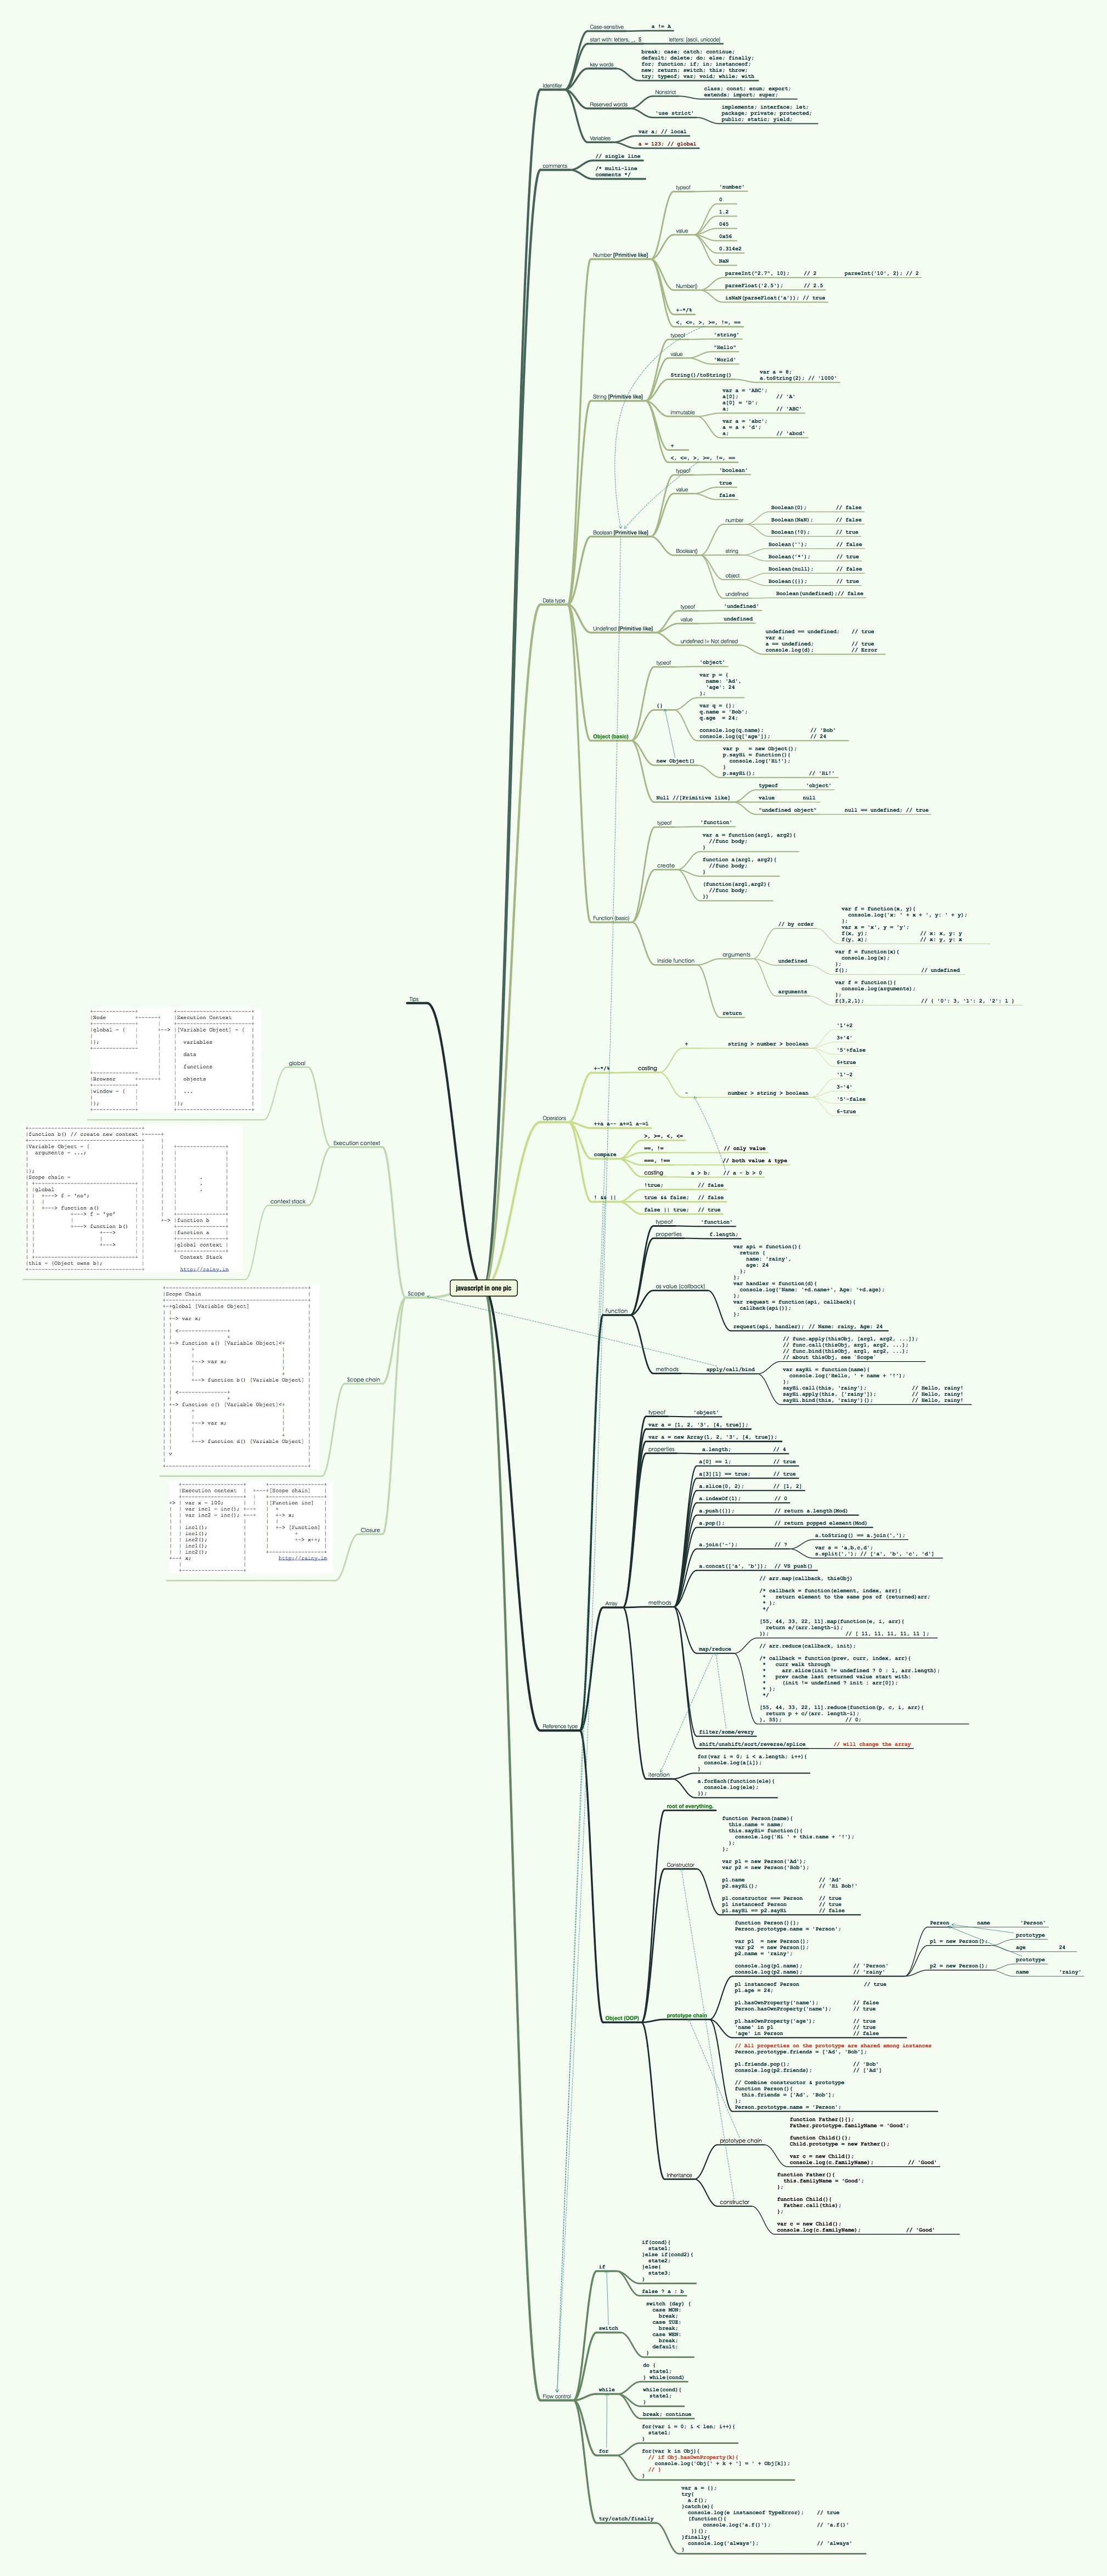 infographic-the-entire-javascript-language-in-one-single-image-491250-2.jpg